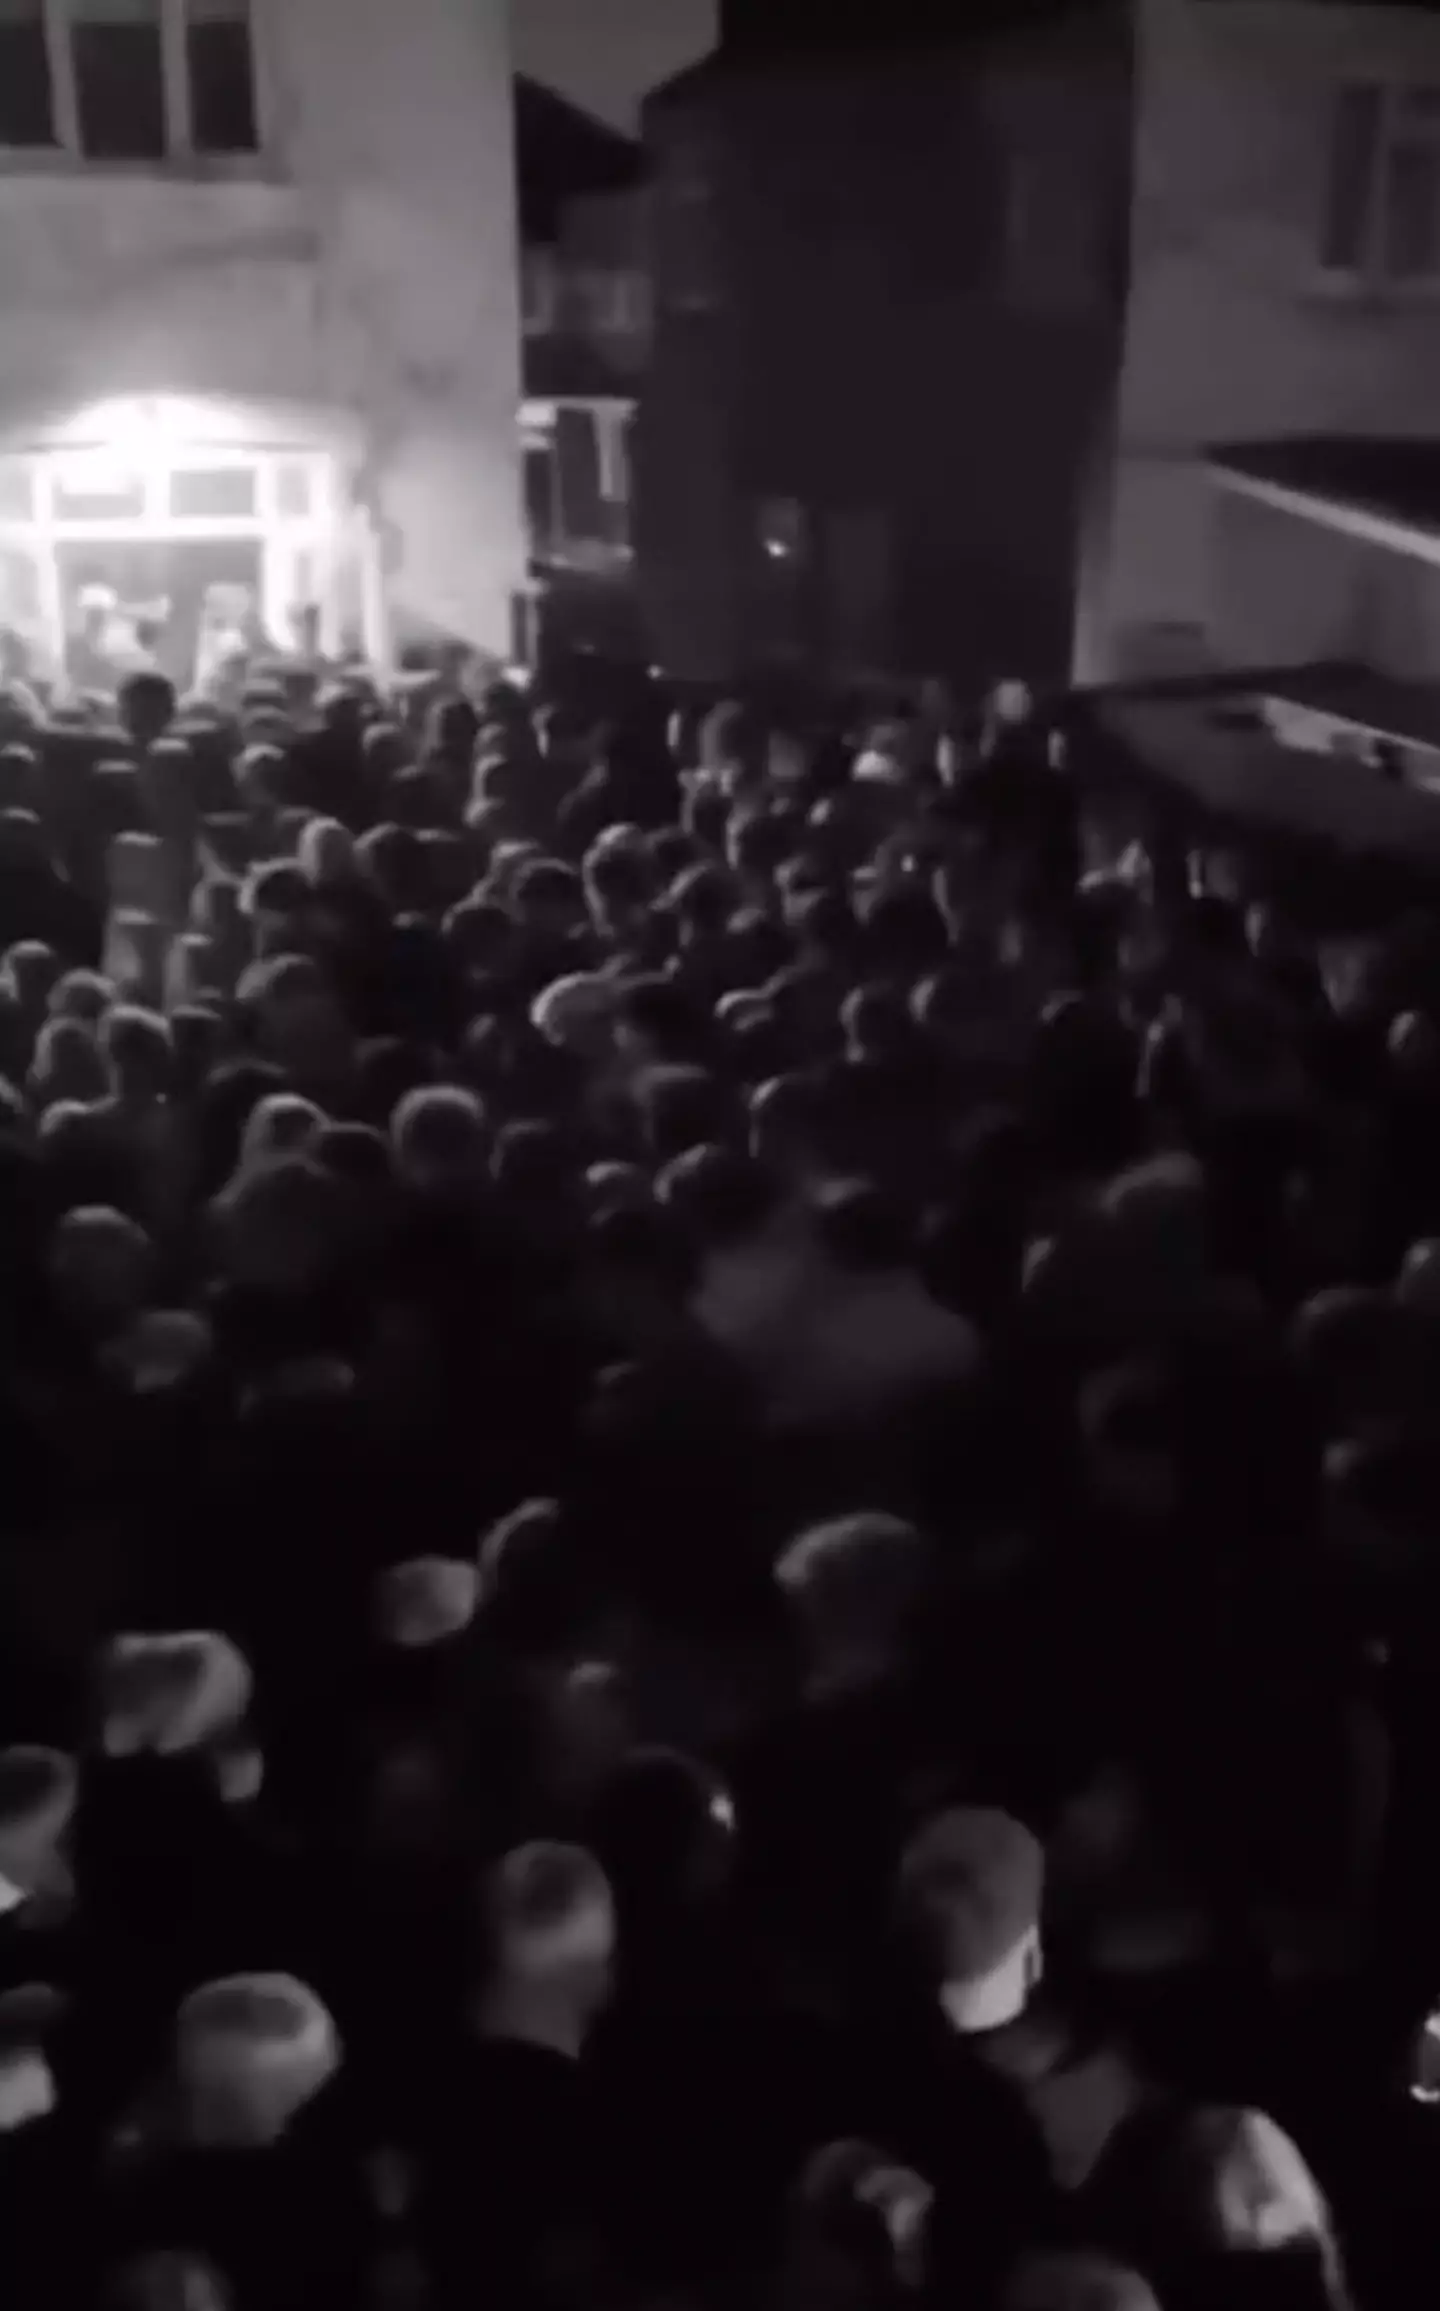 The video shows swathes of avid party-goers all crashing a house.